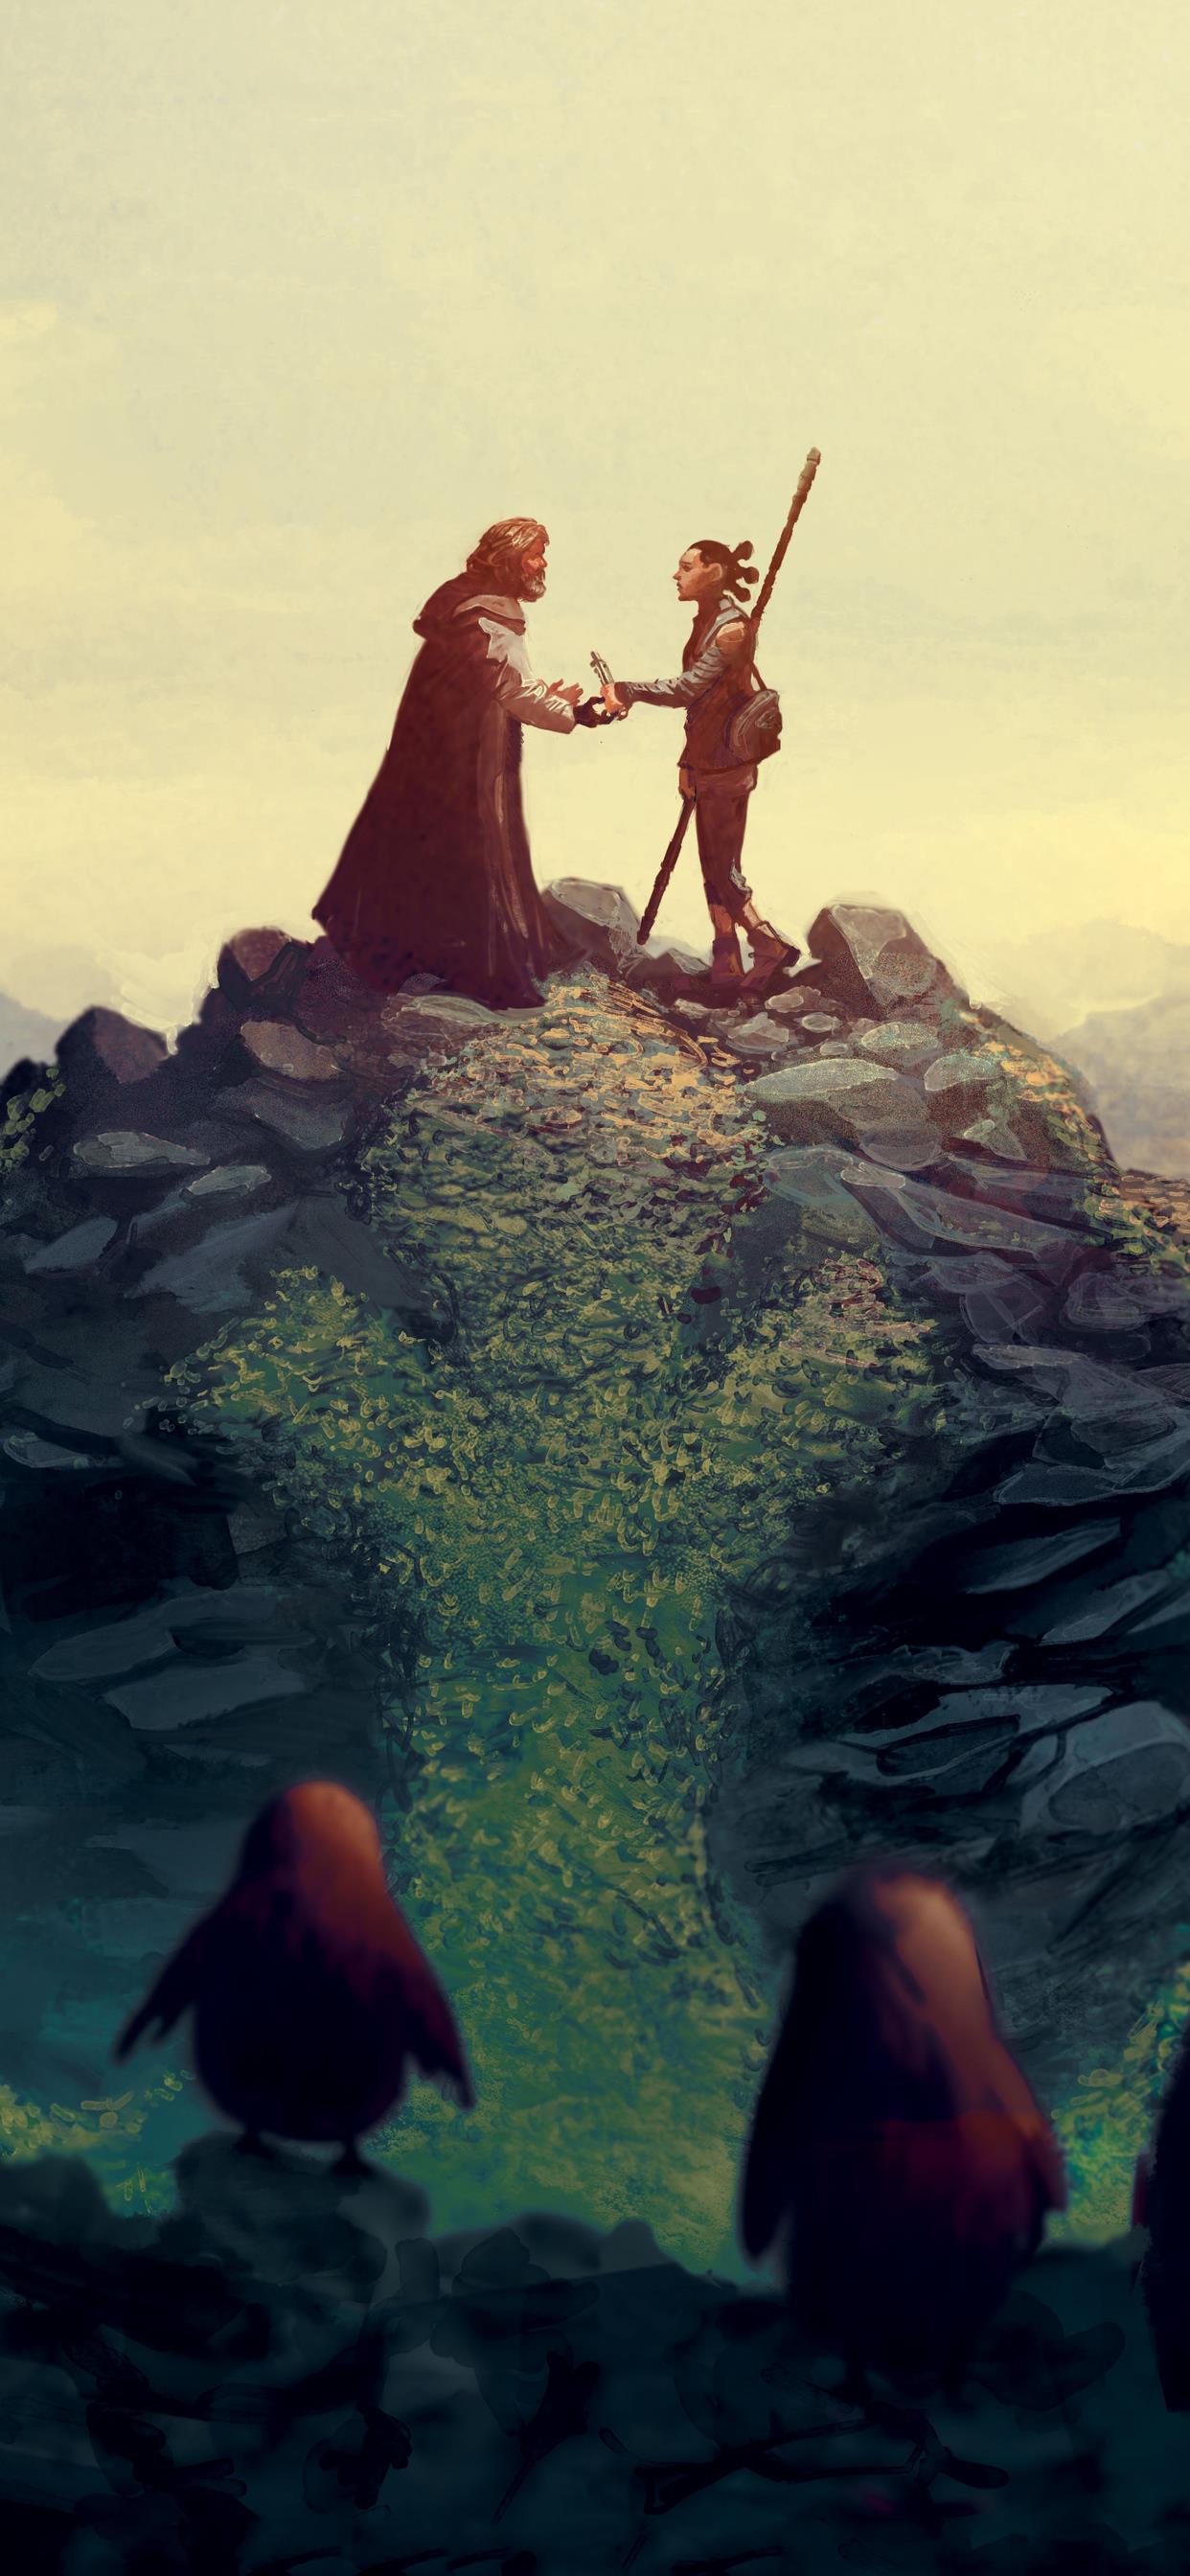 Two characters on a cliff, one holding a staff, facing each other. - Star Wars